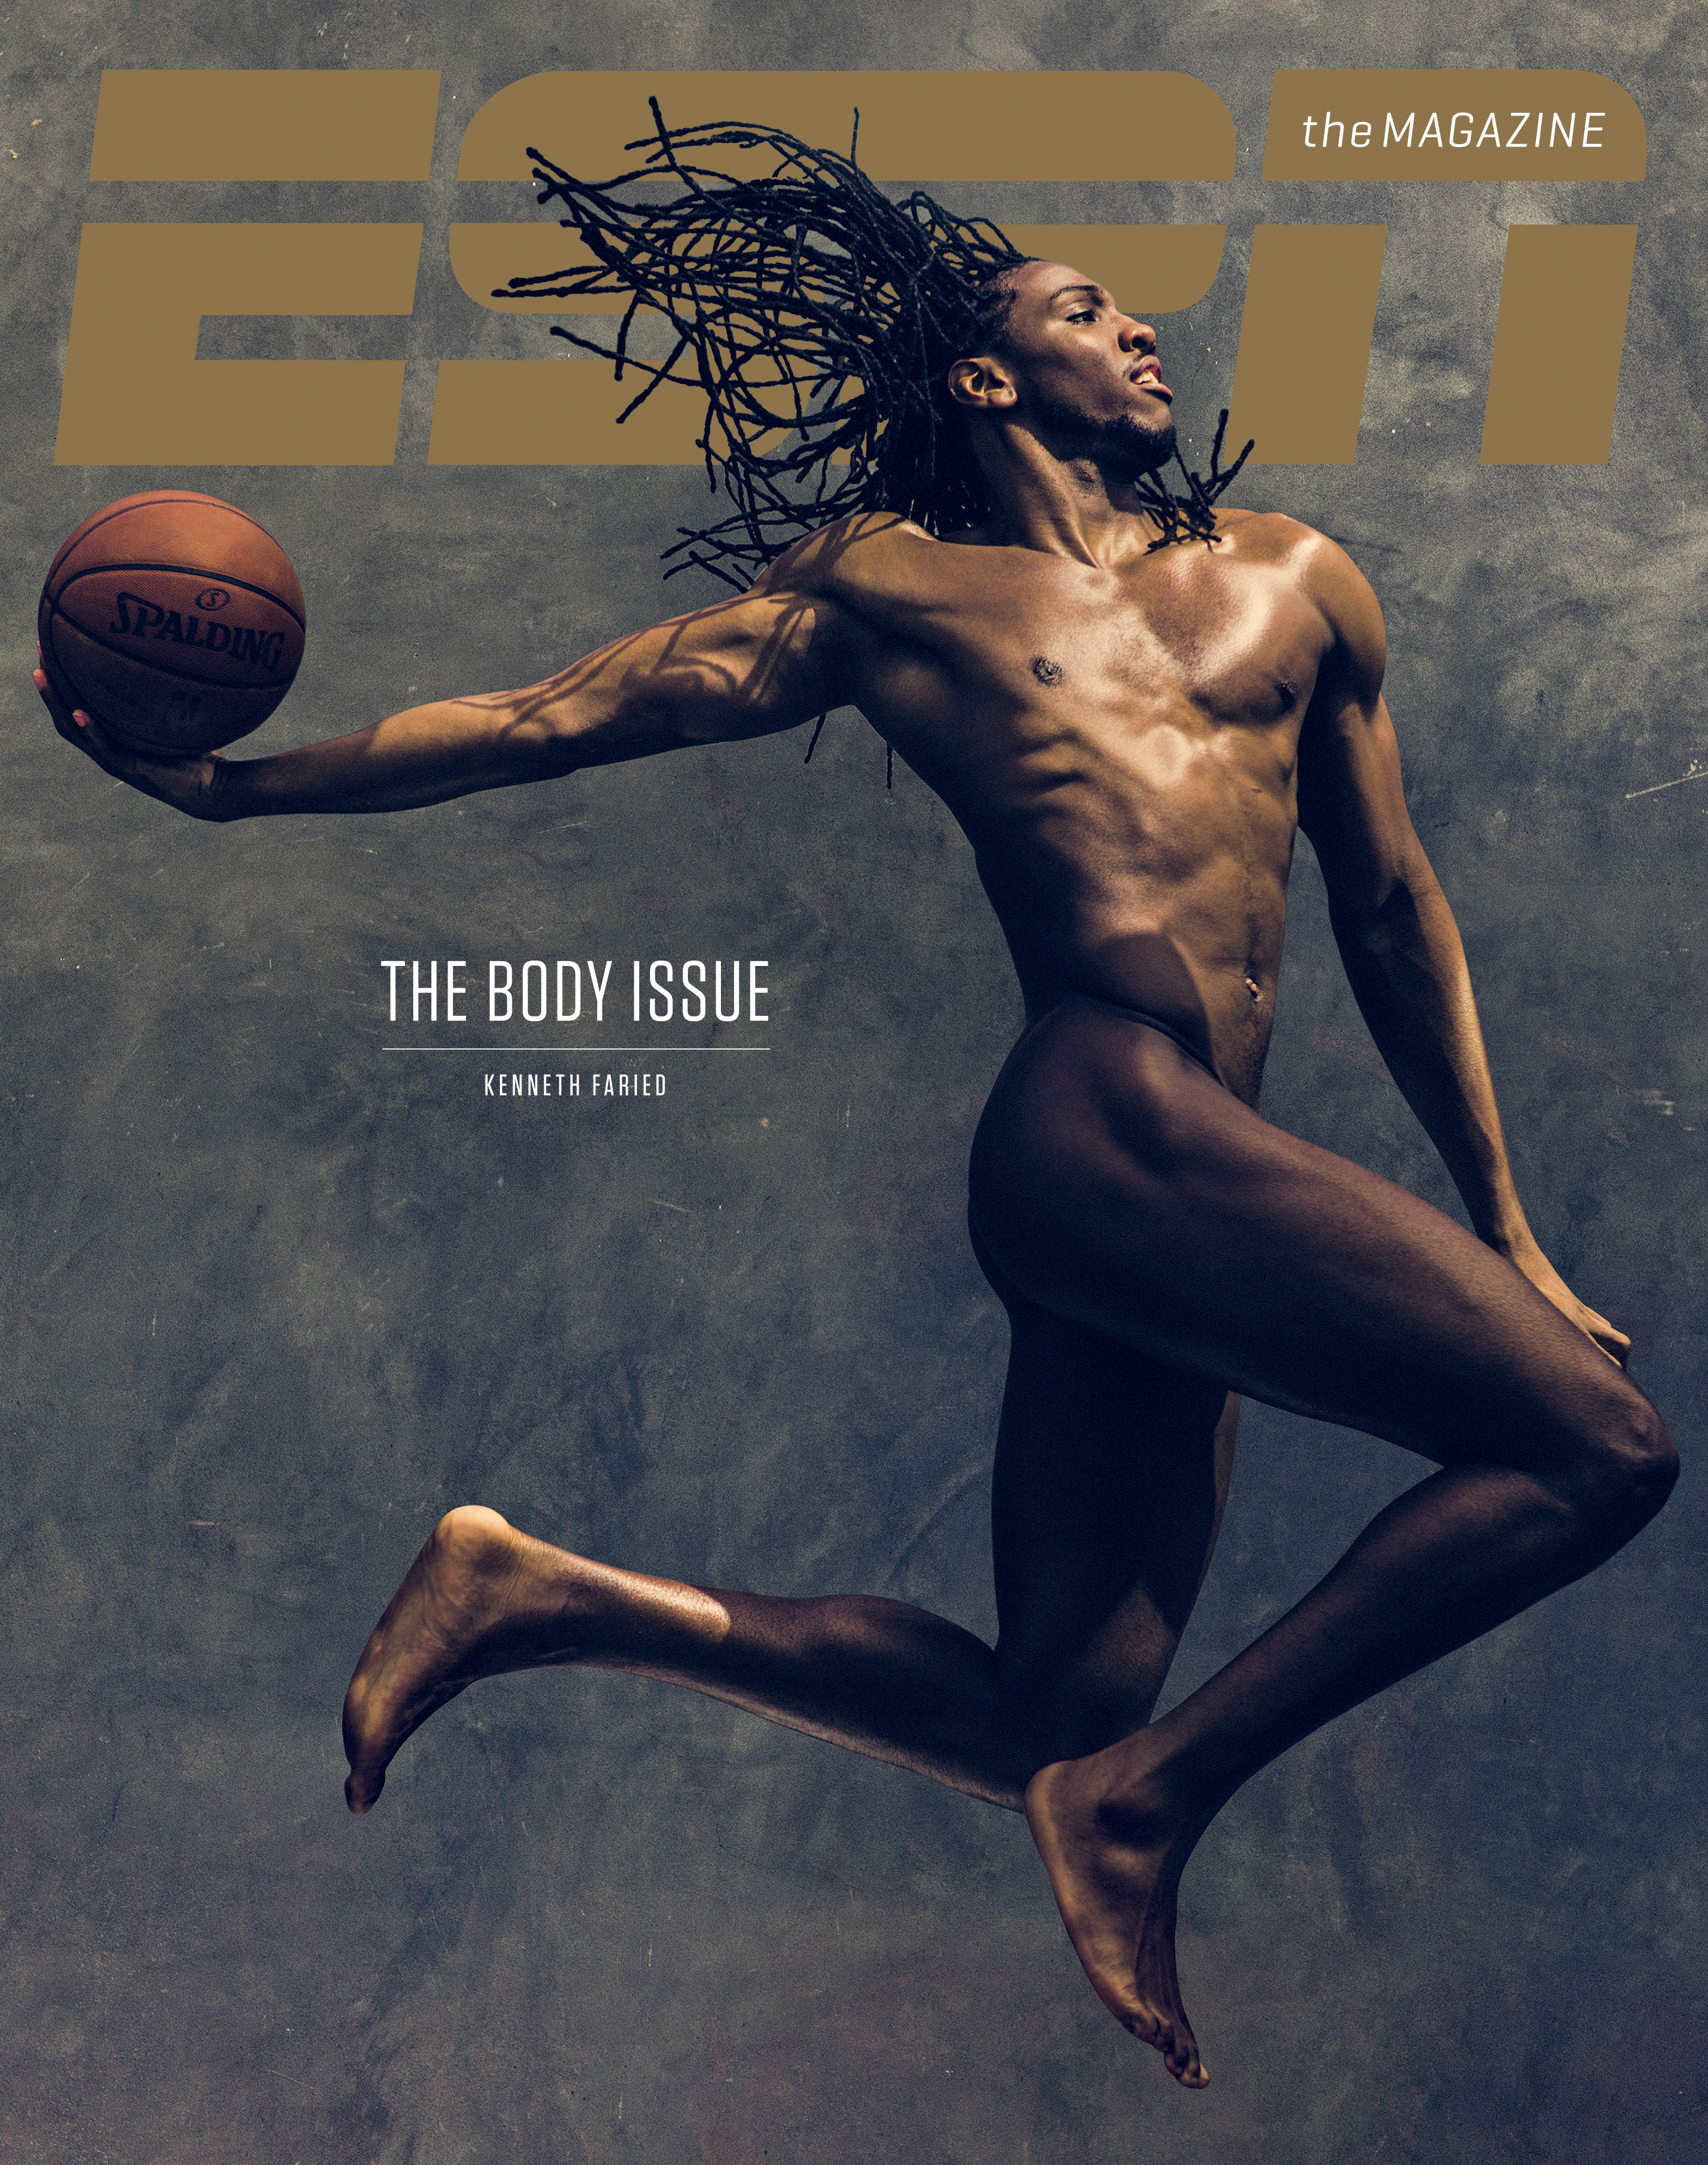 ESPN The Magazine-July 22, "Kenneth Faried in The Body Issue"